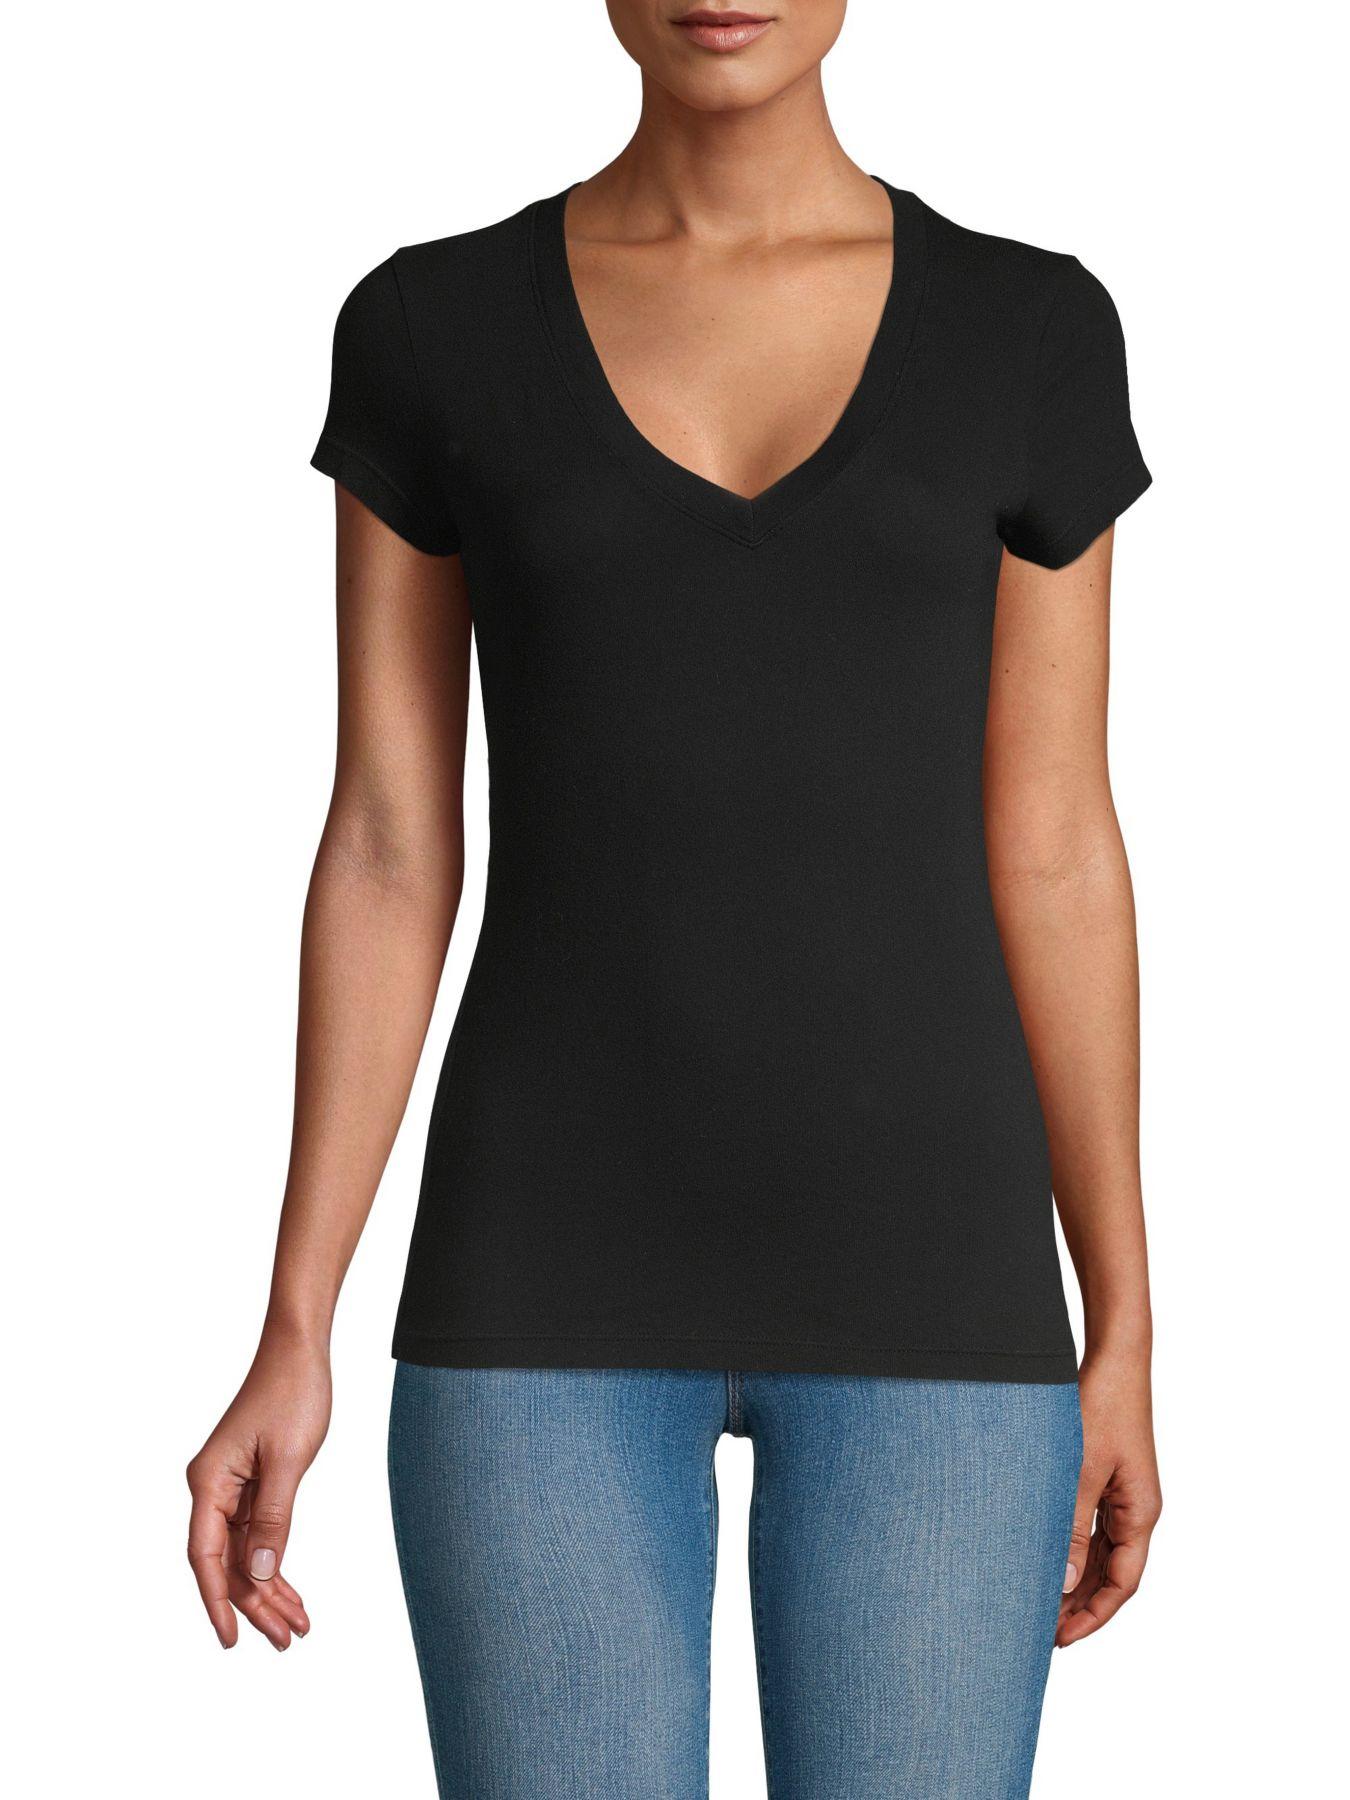 L'Agence Cotton Becca T-shirt in Black - Save 7% - Lyst